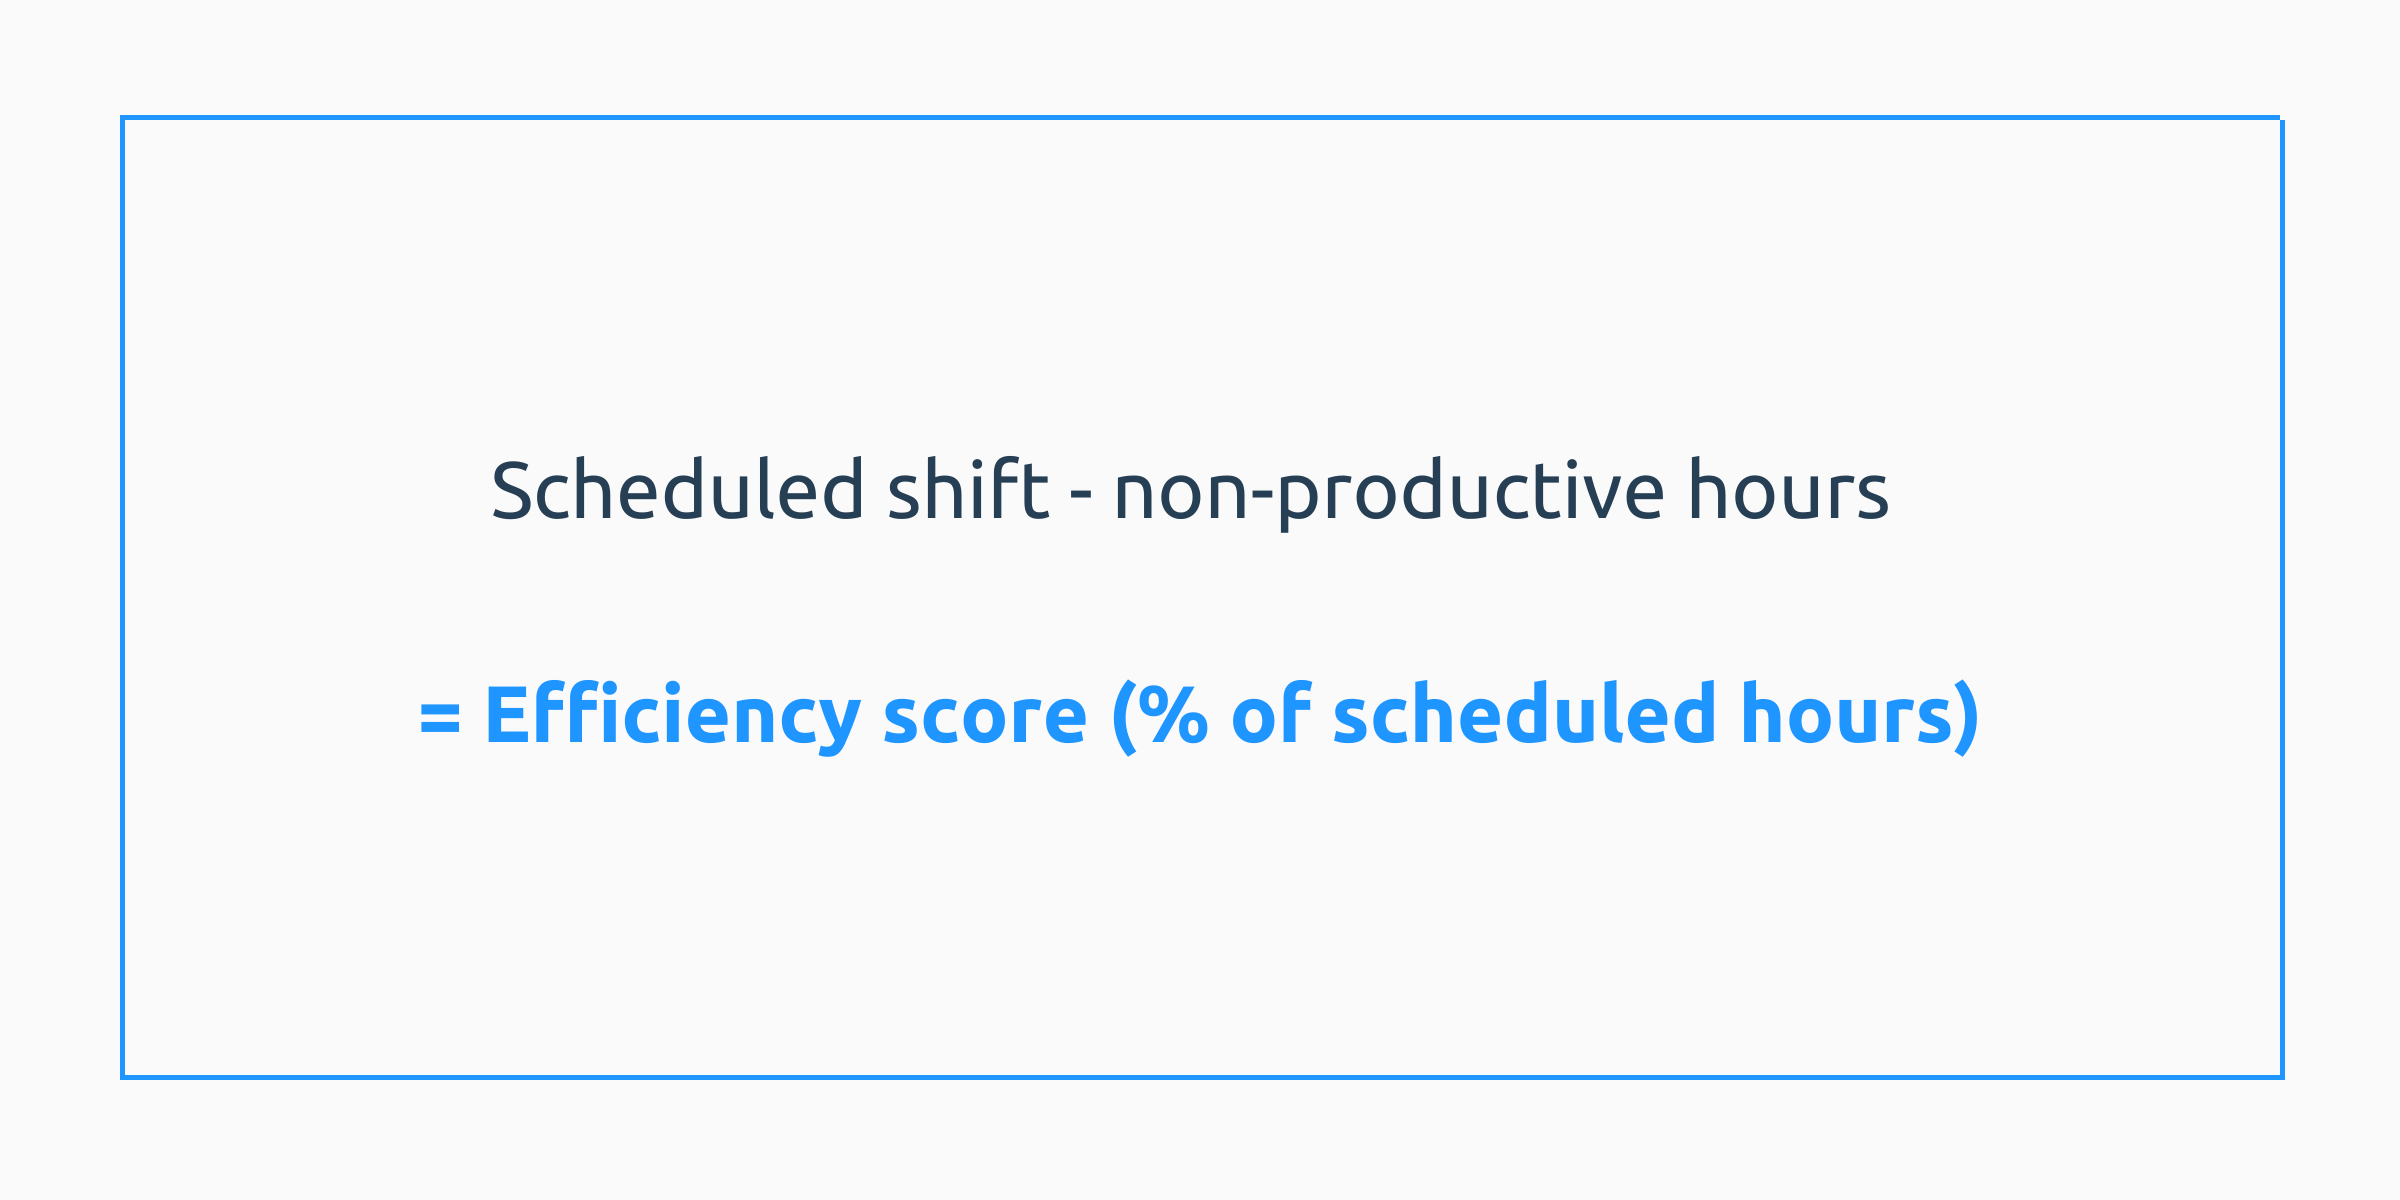 Scheduled shift - non-productive hours = Efficiency score (% of scheduled hours)